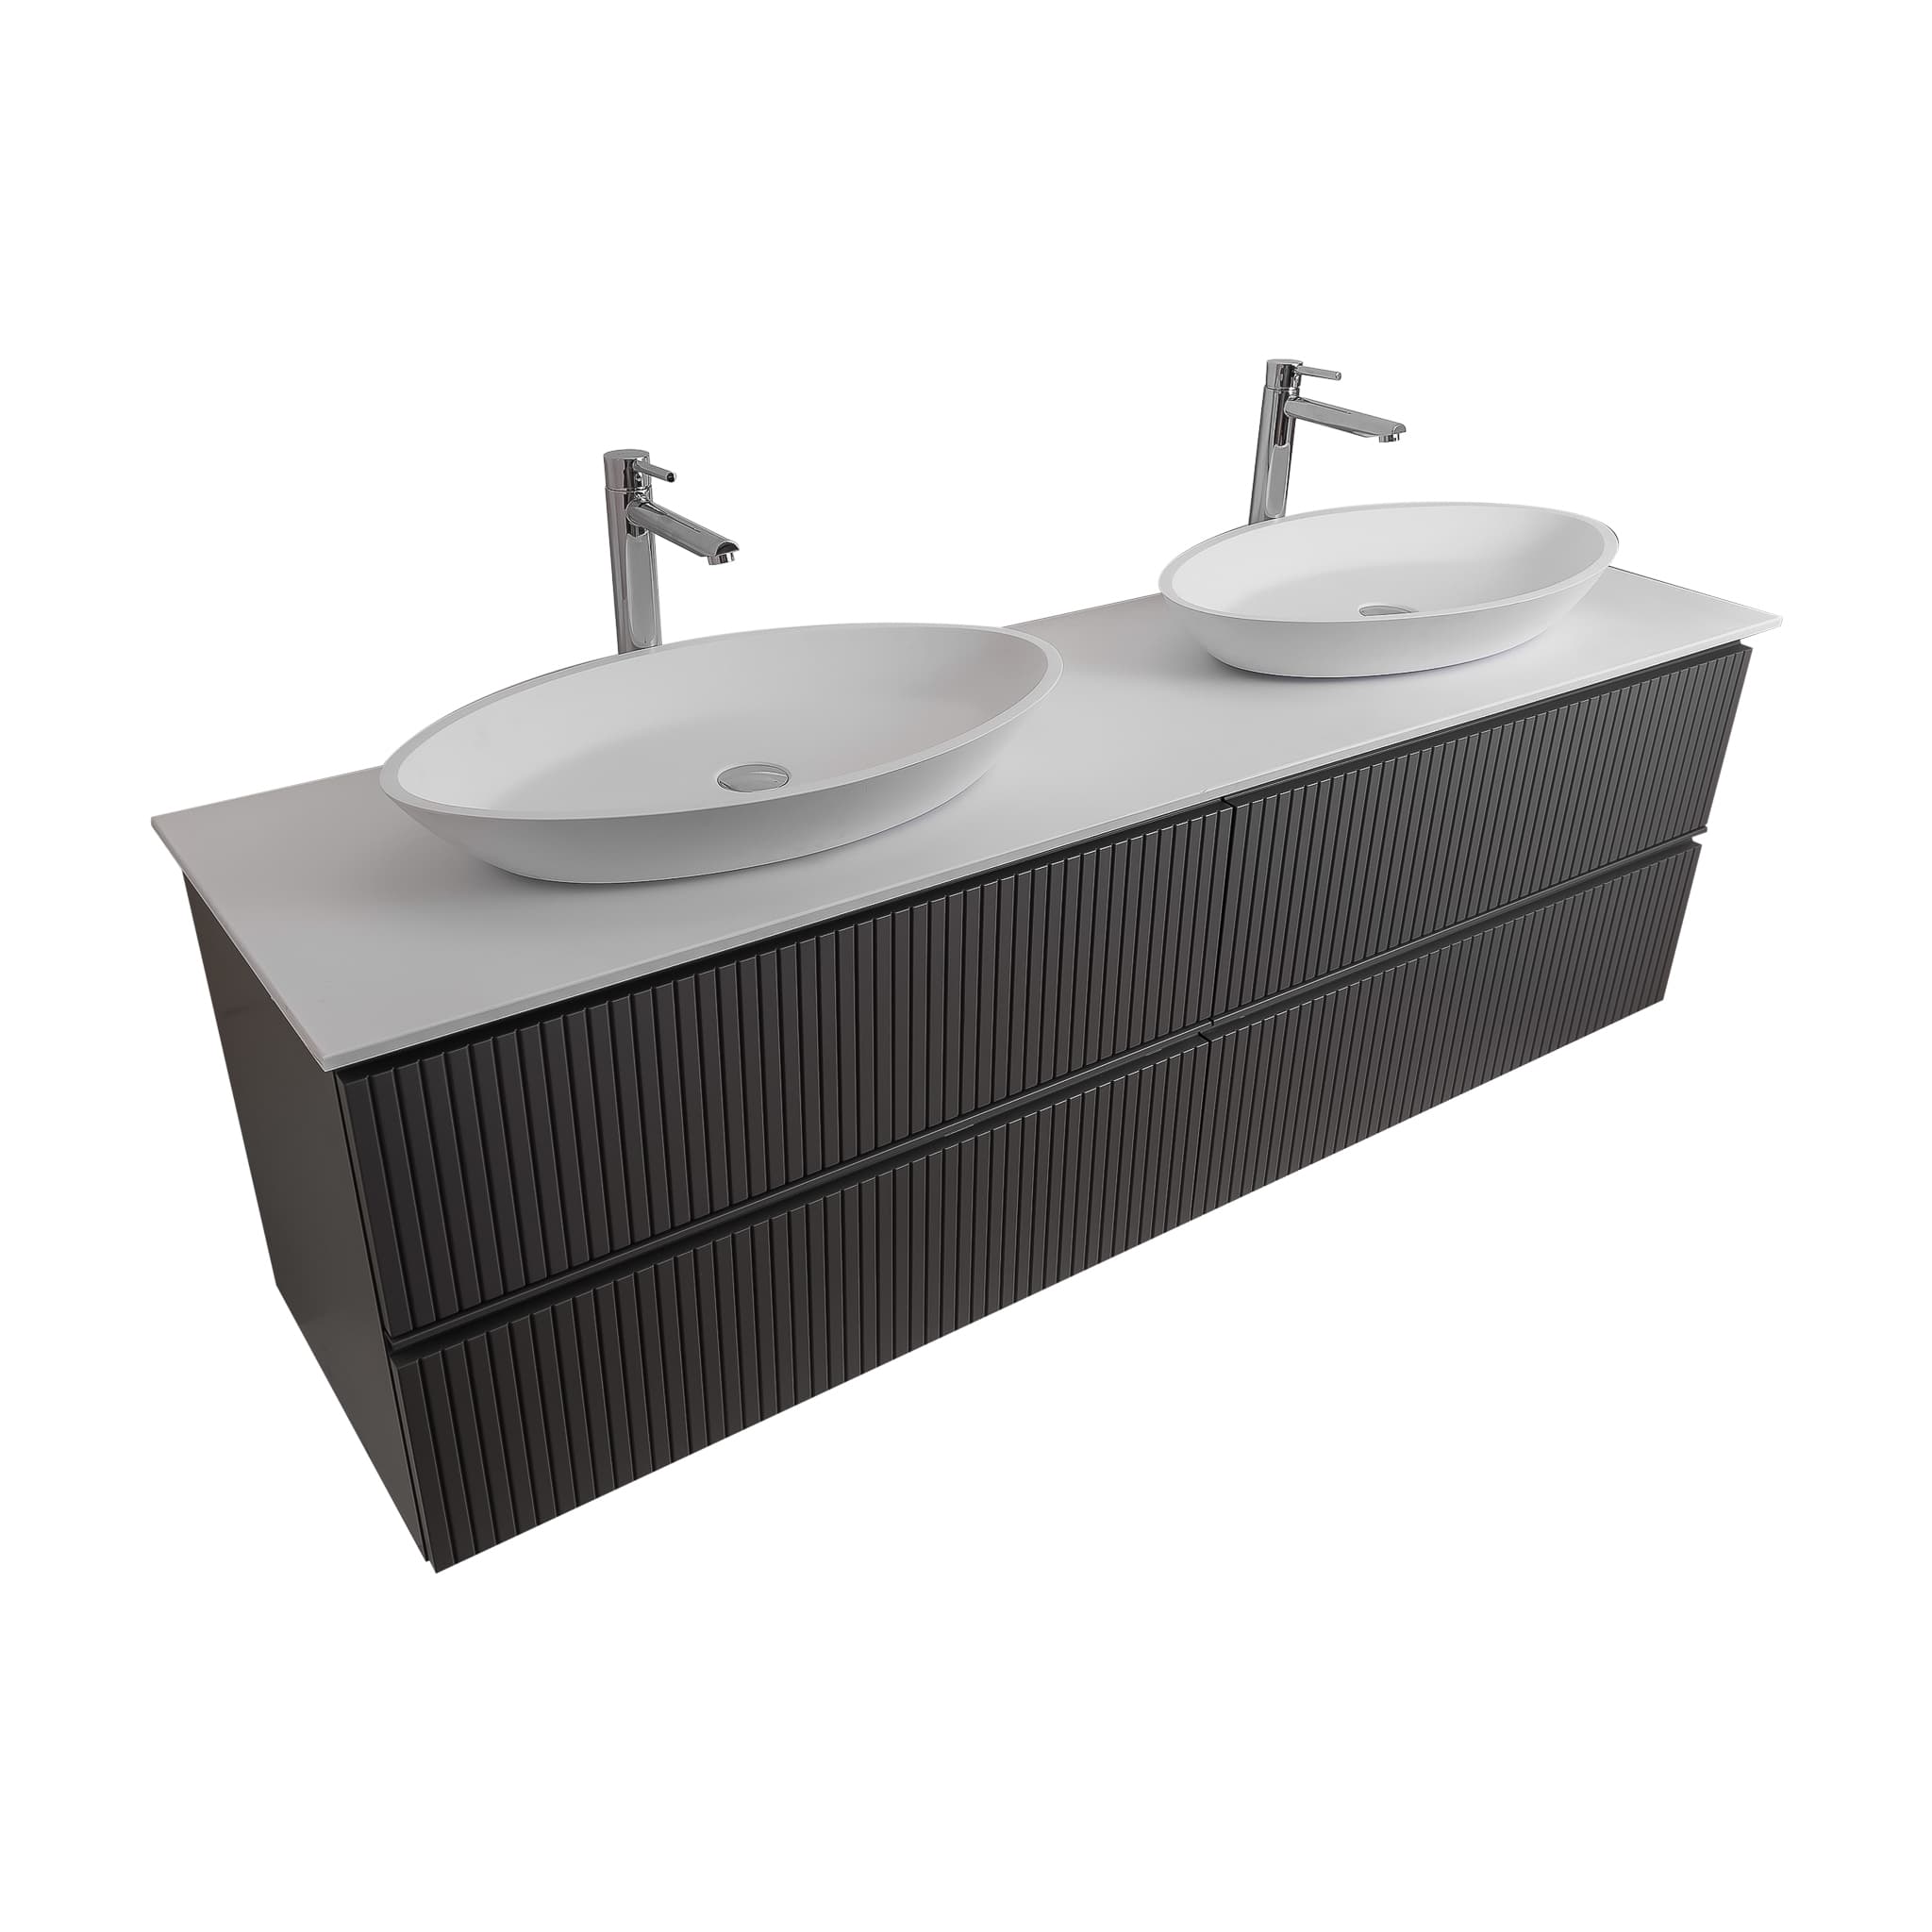 Ares 63 Matte Grey Cabinet, Solid Surface Flat White Counter And Two Oval Solid Surface White Basin 1305, Wall Mounted Modern Vanity Set